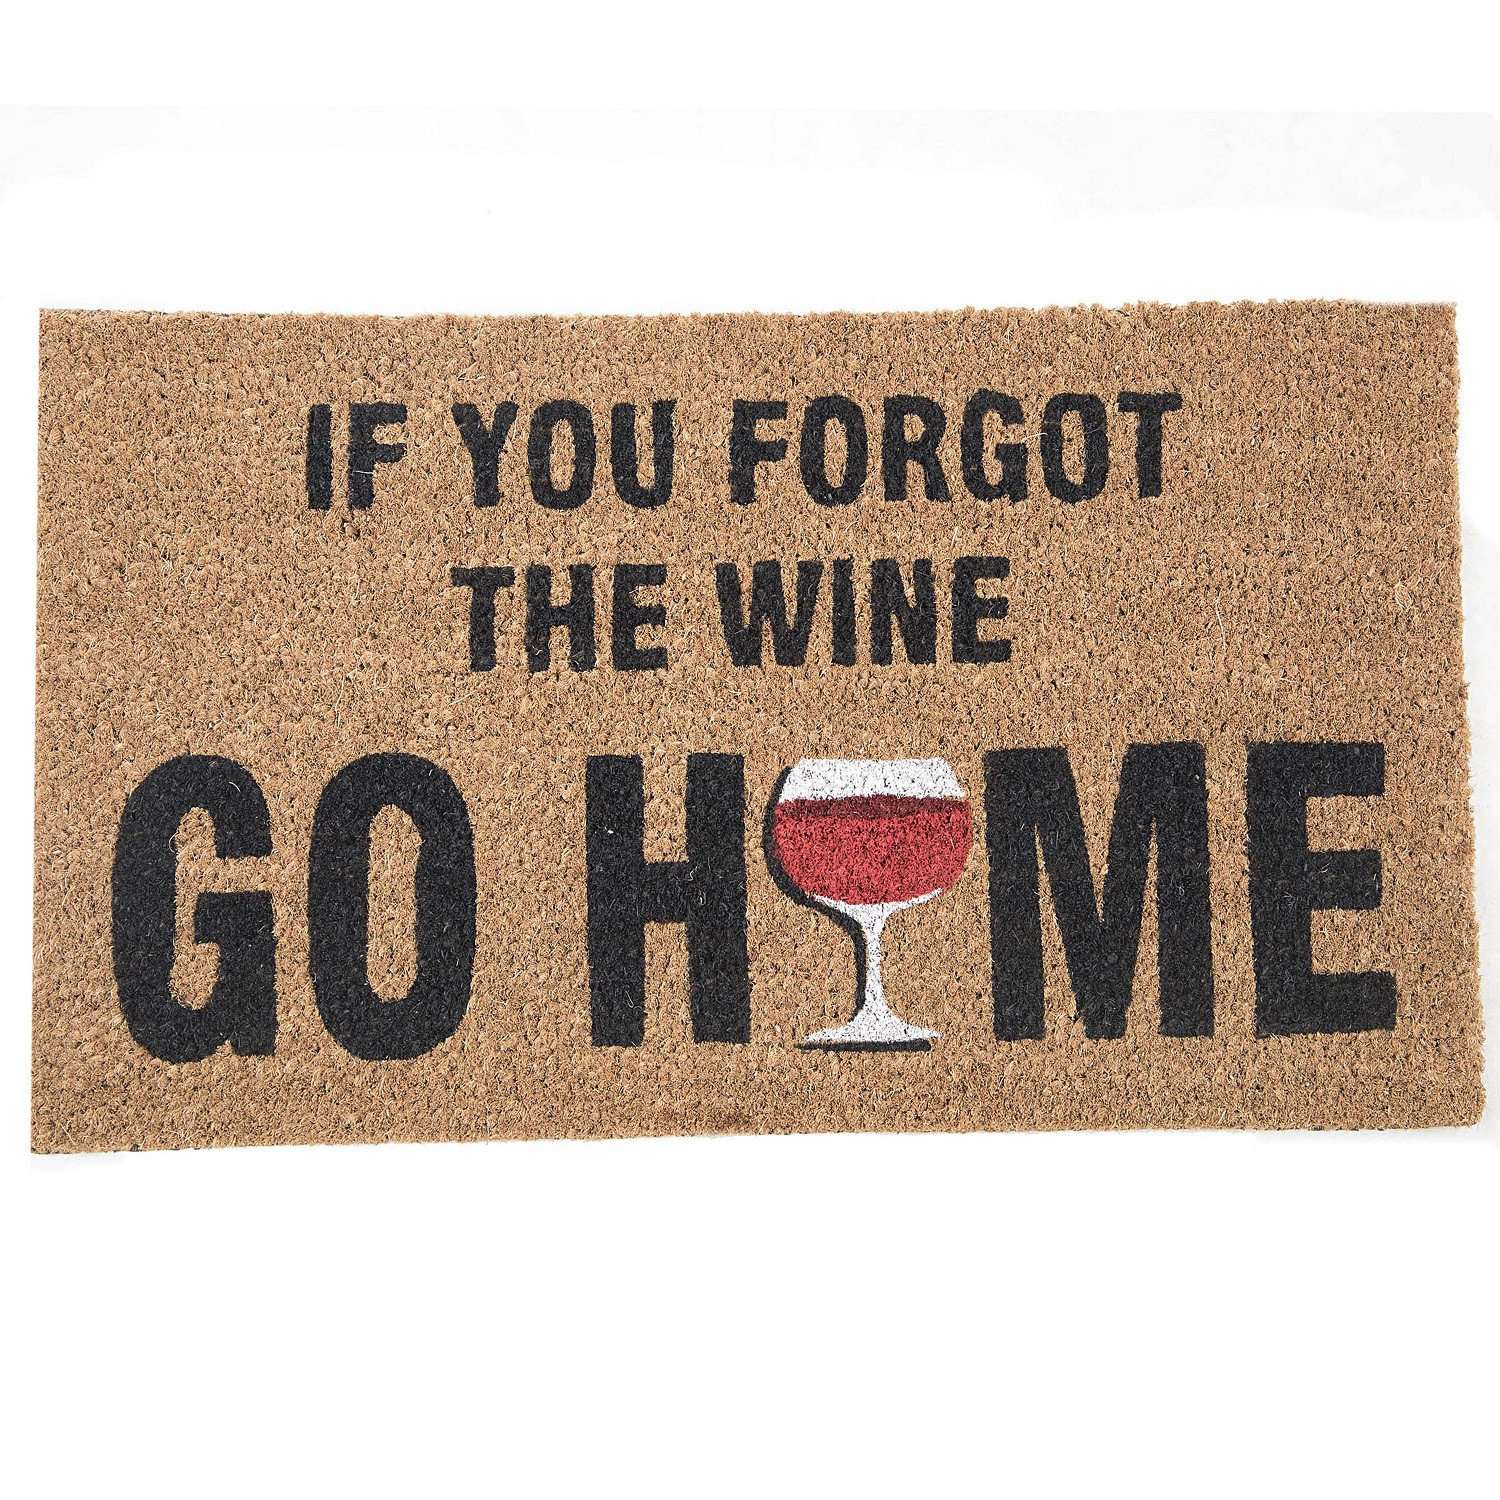 SWHF Premium Coir and Rubber Quirky Design Door and Floor Mat : If You Forgot the Wine Go Home - SWHF